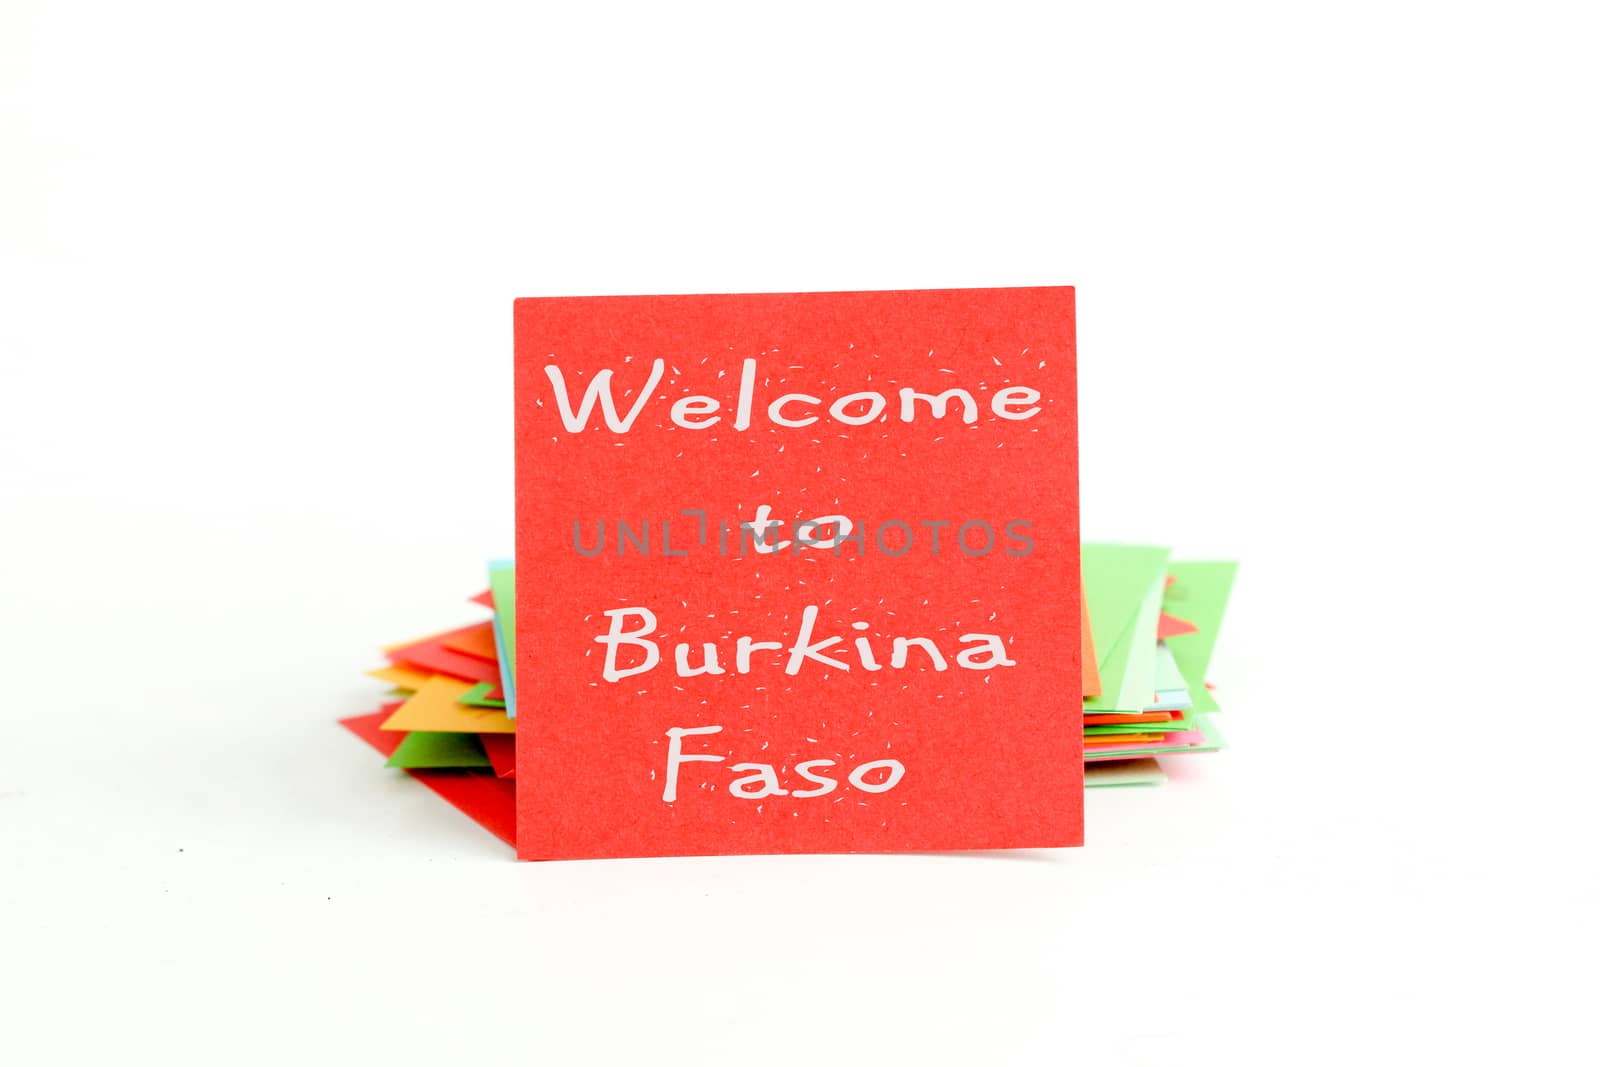 picture of a red note paper with text welcome to burkina faso